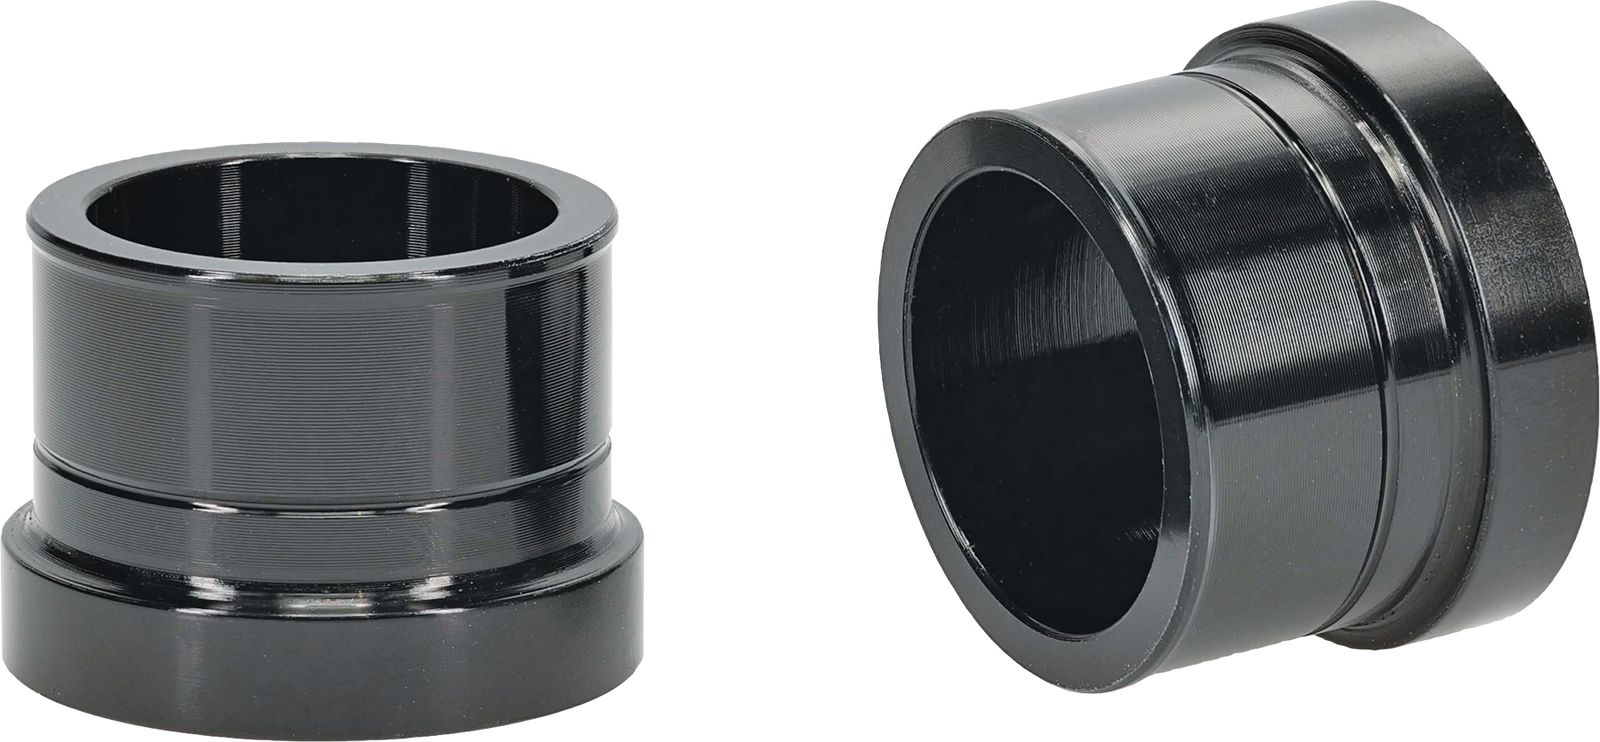 Wrp Front Wheel Spacer Kits - WRP111027 image